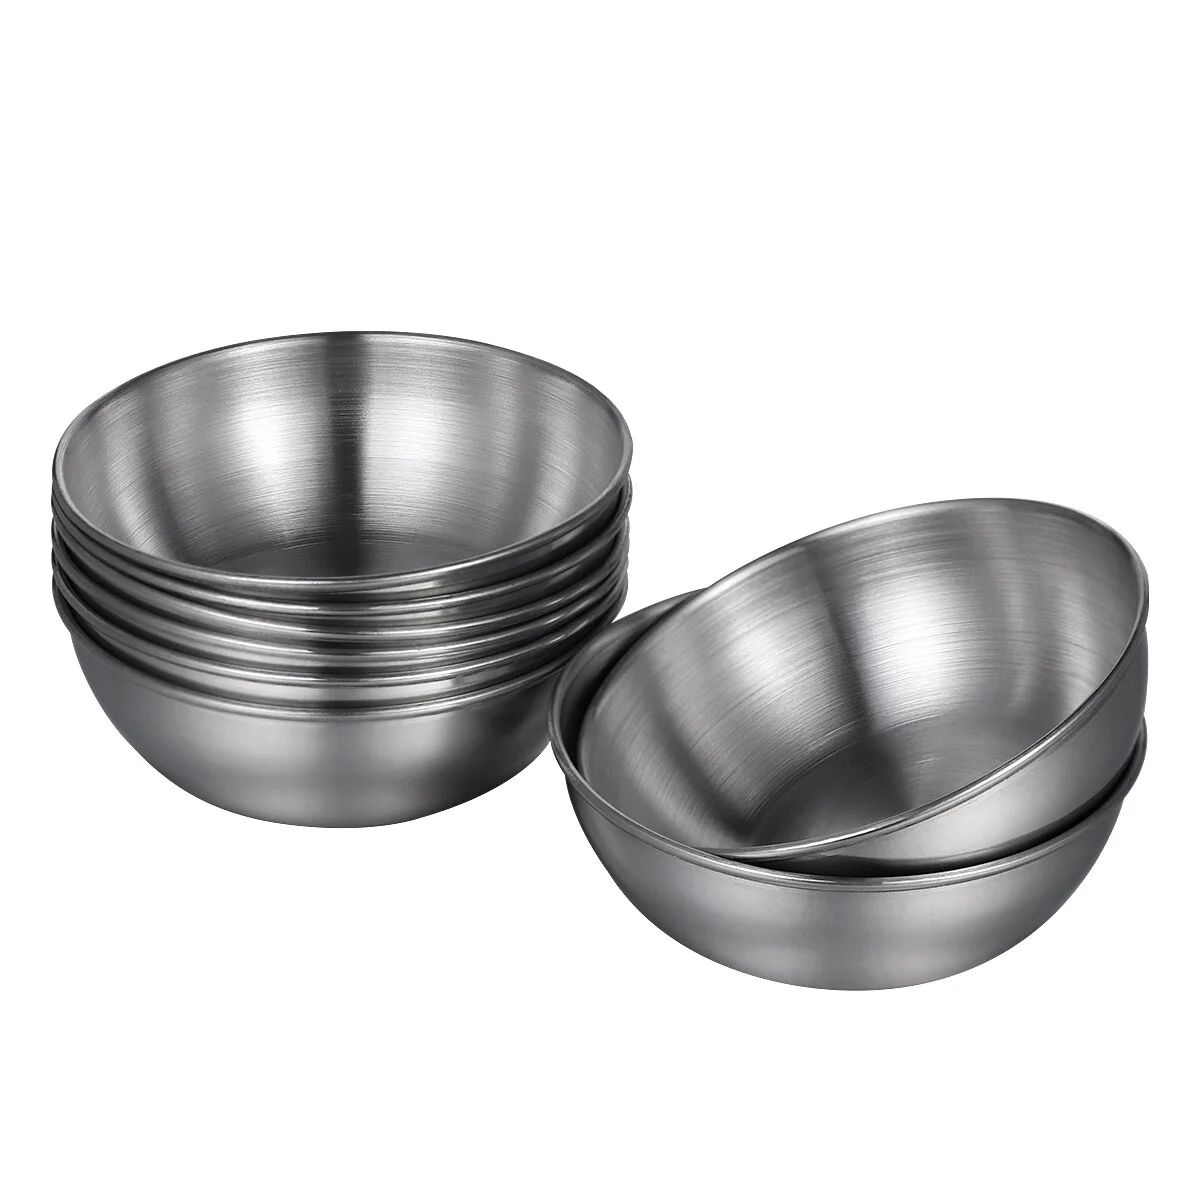 

8 Stainless Steel Sauce Dishes Round Seasoning Dishes Sushi Dipping Bowl Saucers Bowl Appetizer Plates